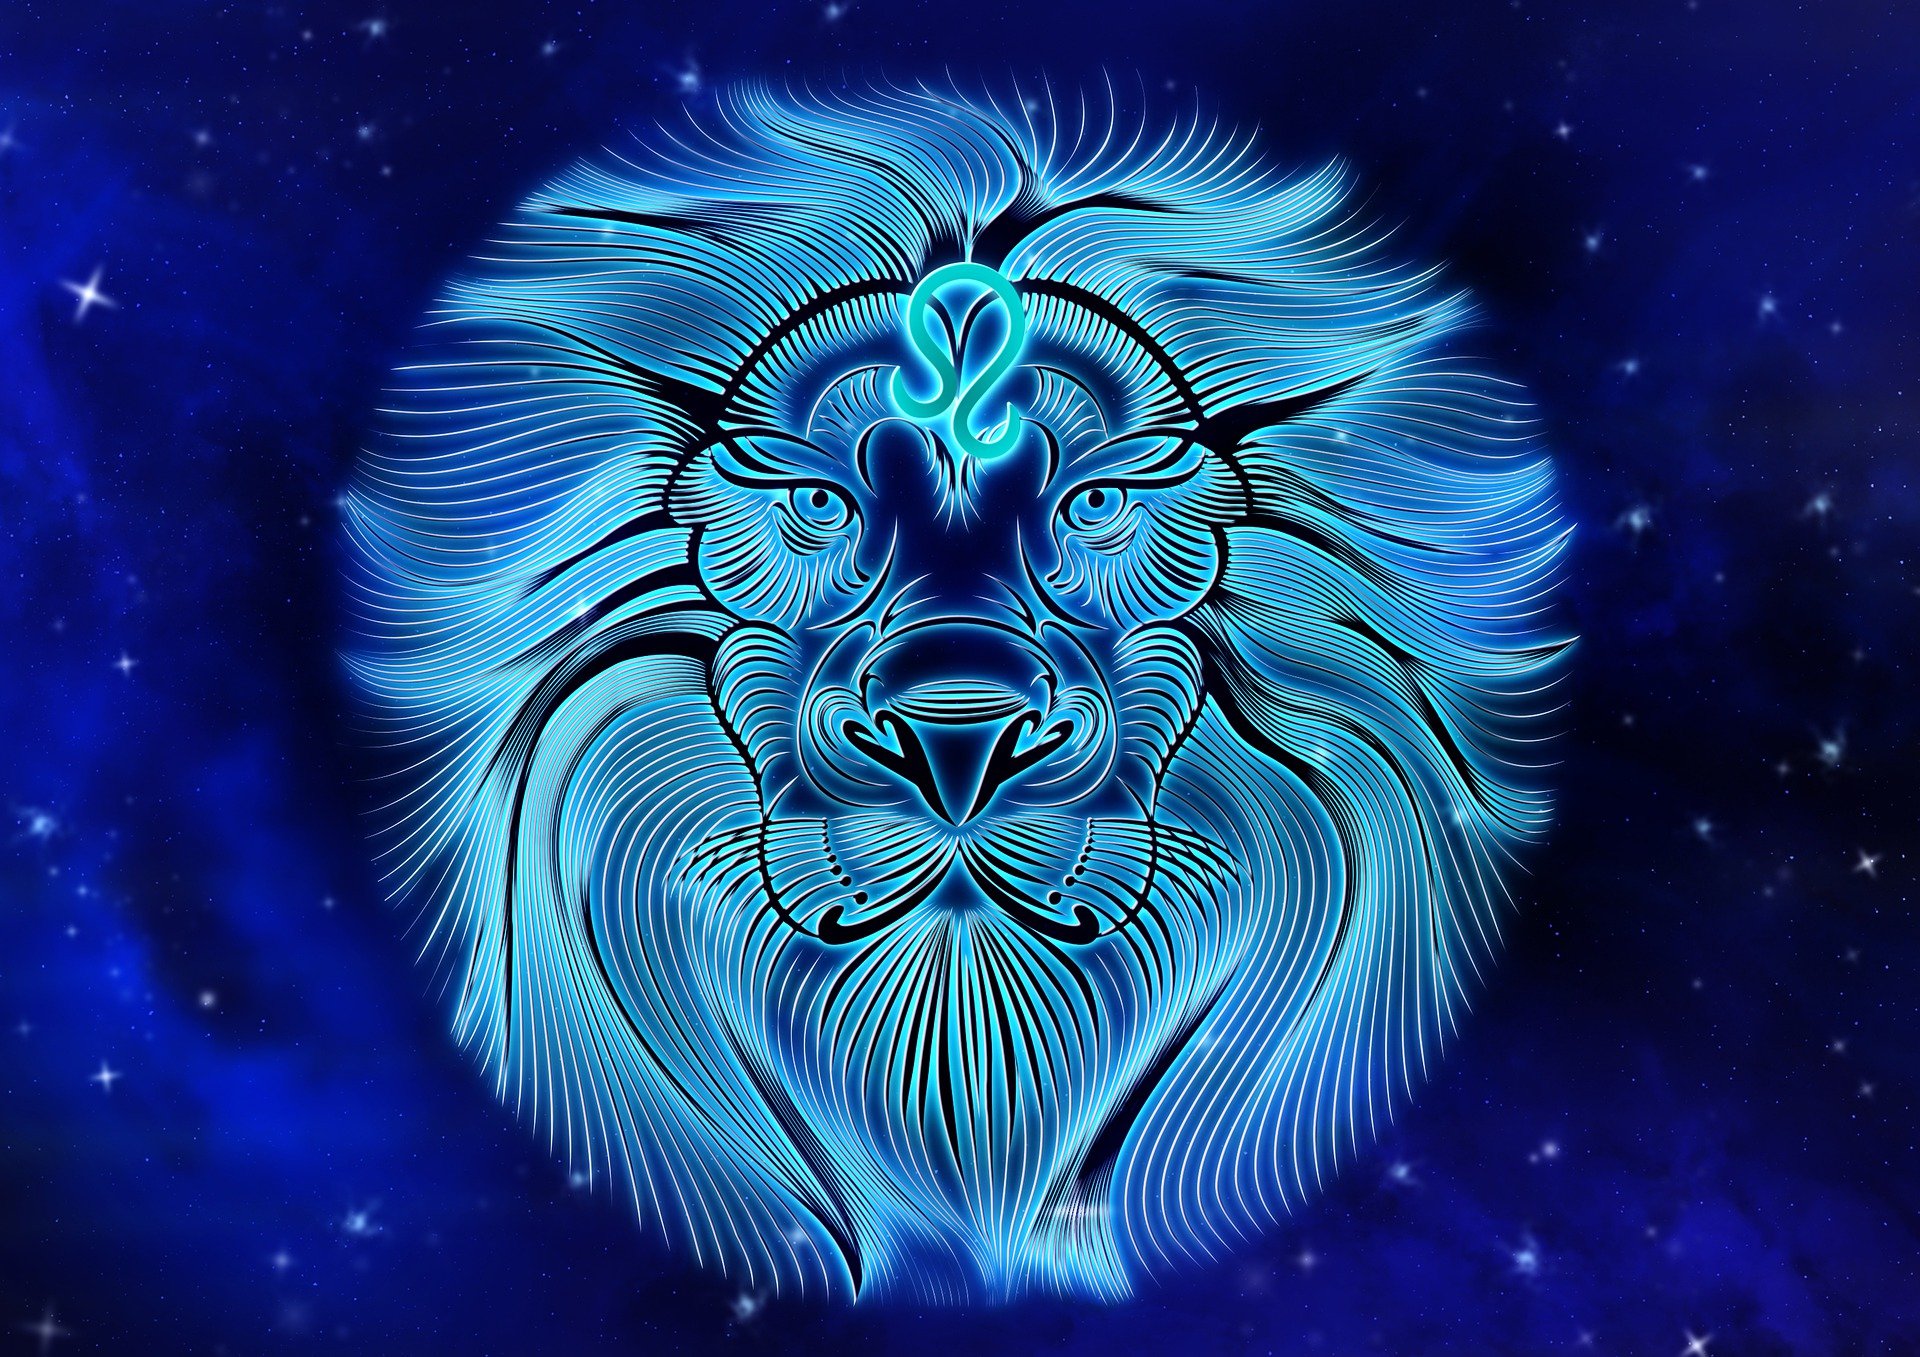 Pictured - A depiction of a Leo star sign | Source: Pixabay 